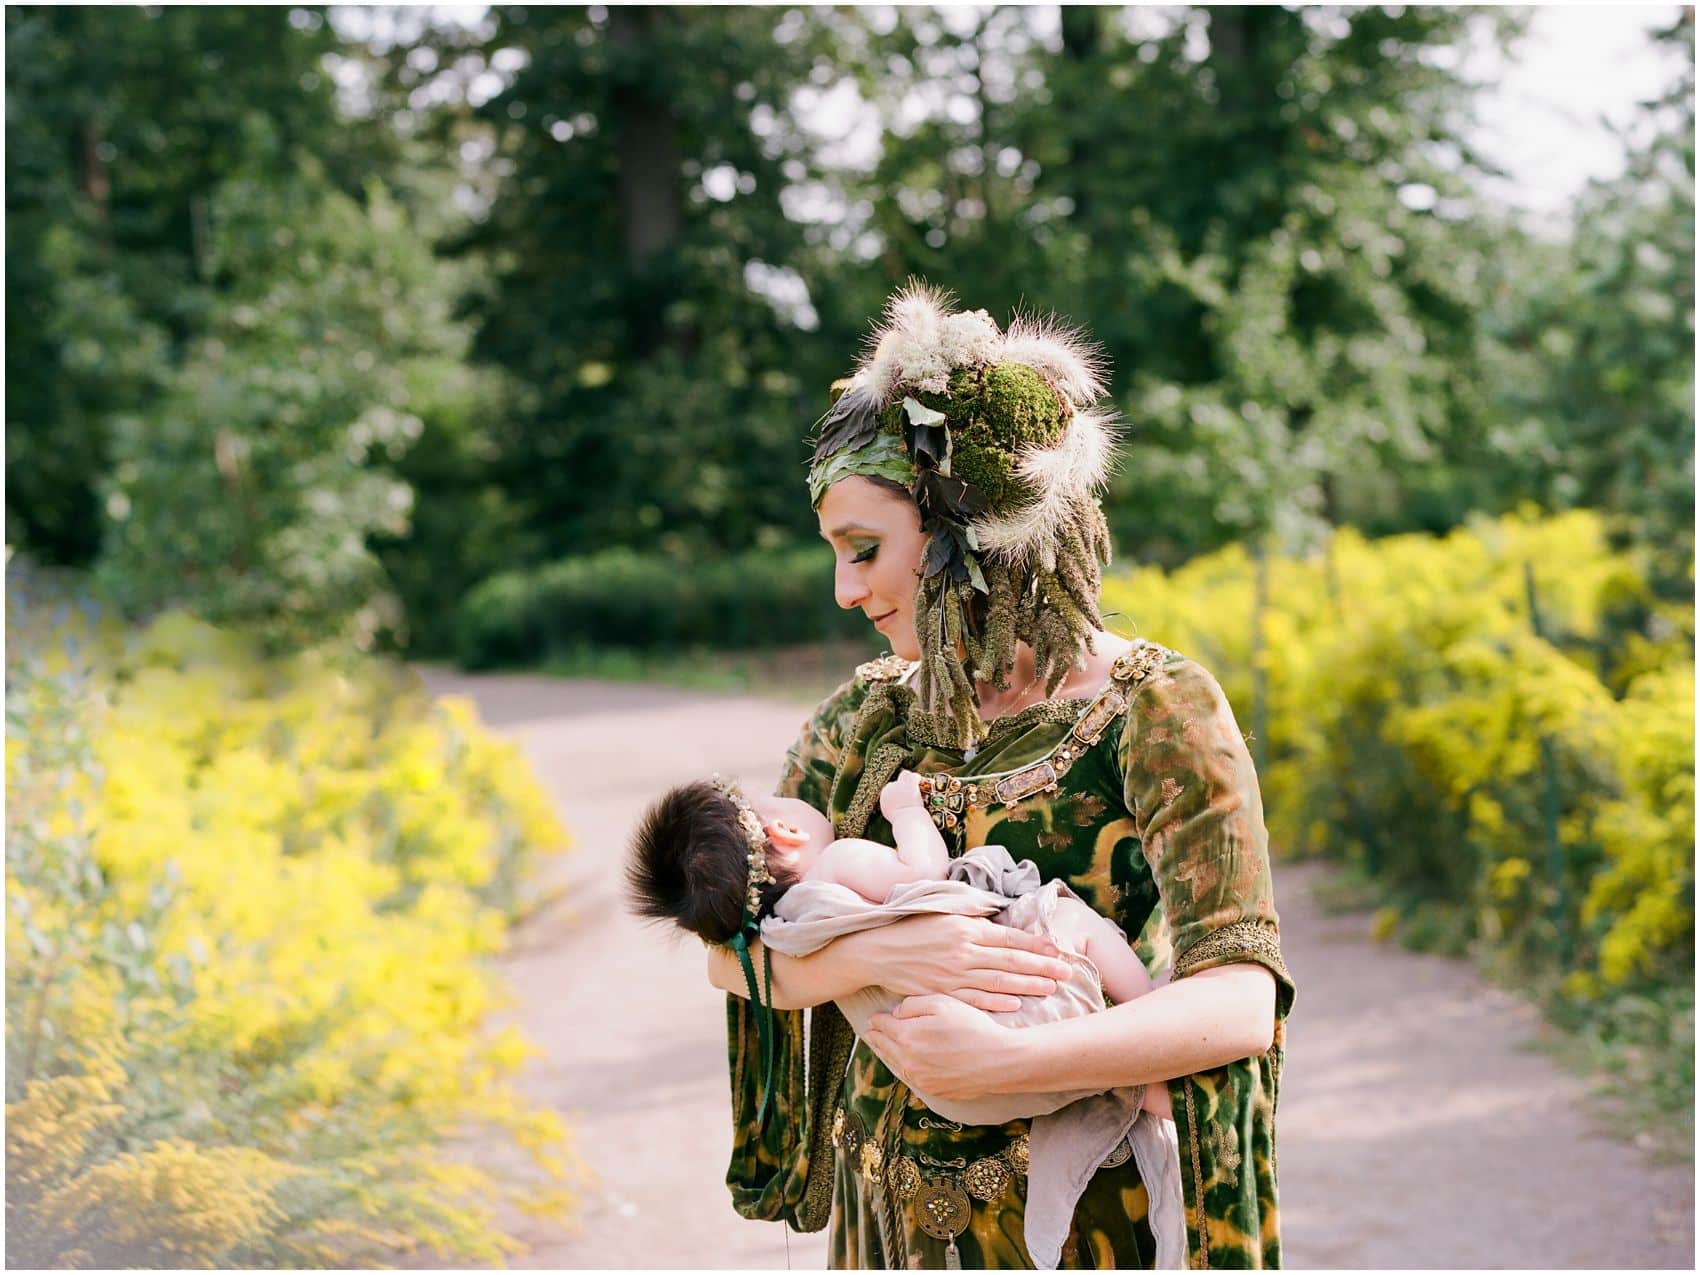 dream photo shoot of newborn photography NYC in yellow garden with a mother adoring her sleeping baby girl